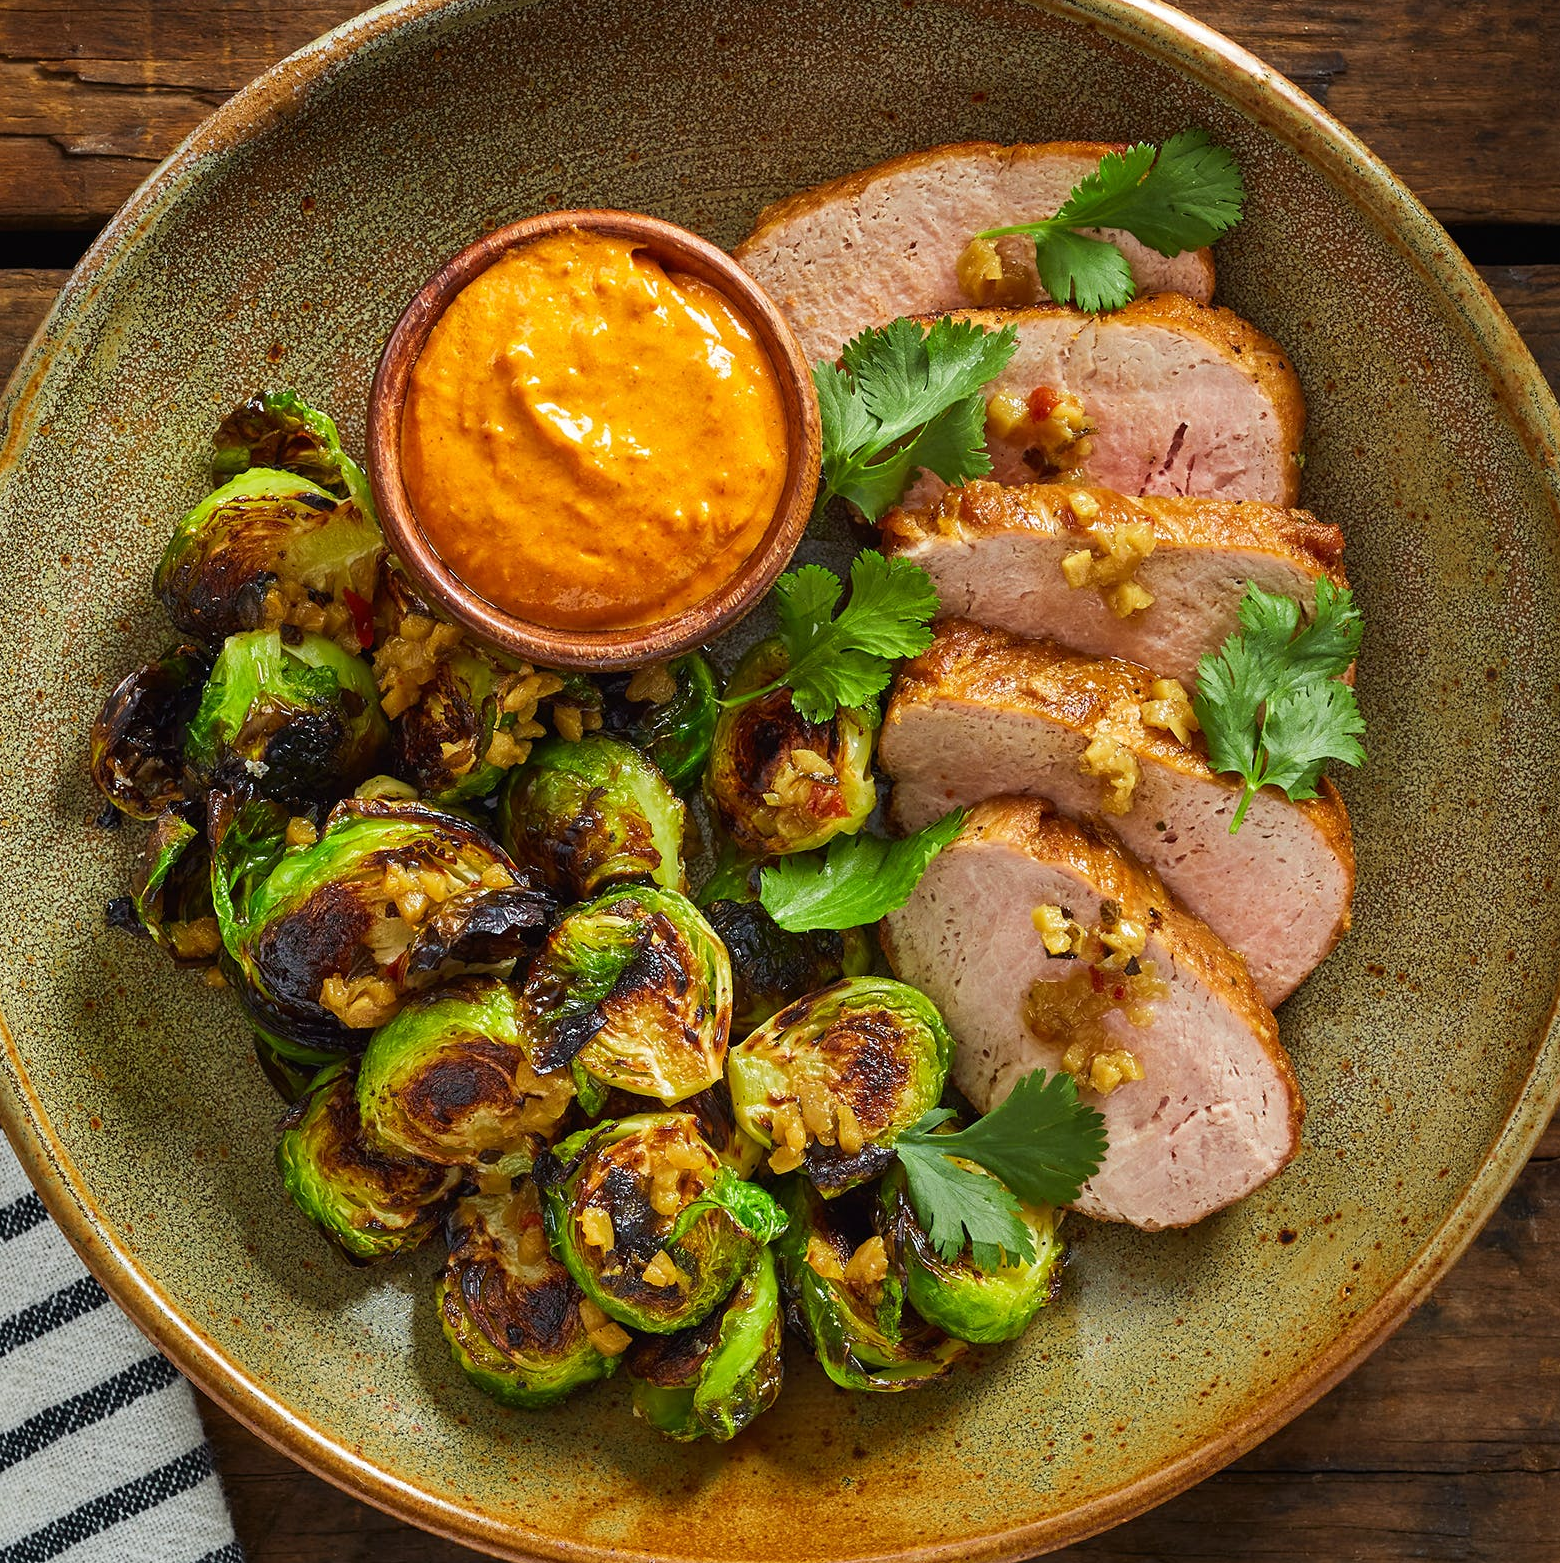 Roasted Pork Tenderloin with Charred Brussel Sprouts and Peruvian Dipping Sauce